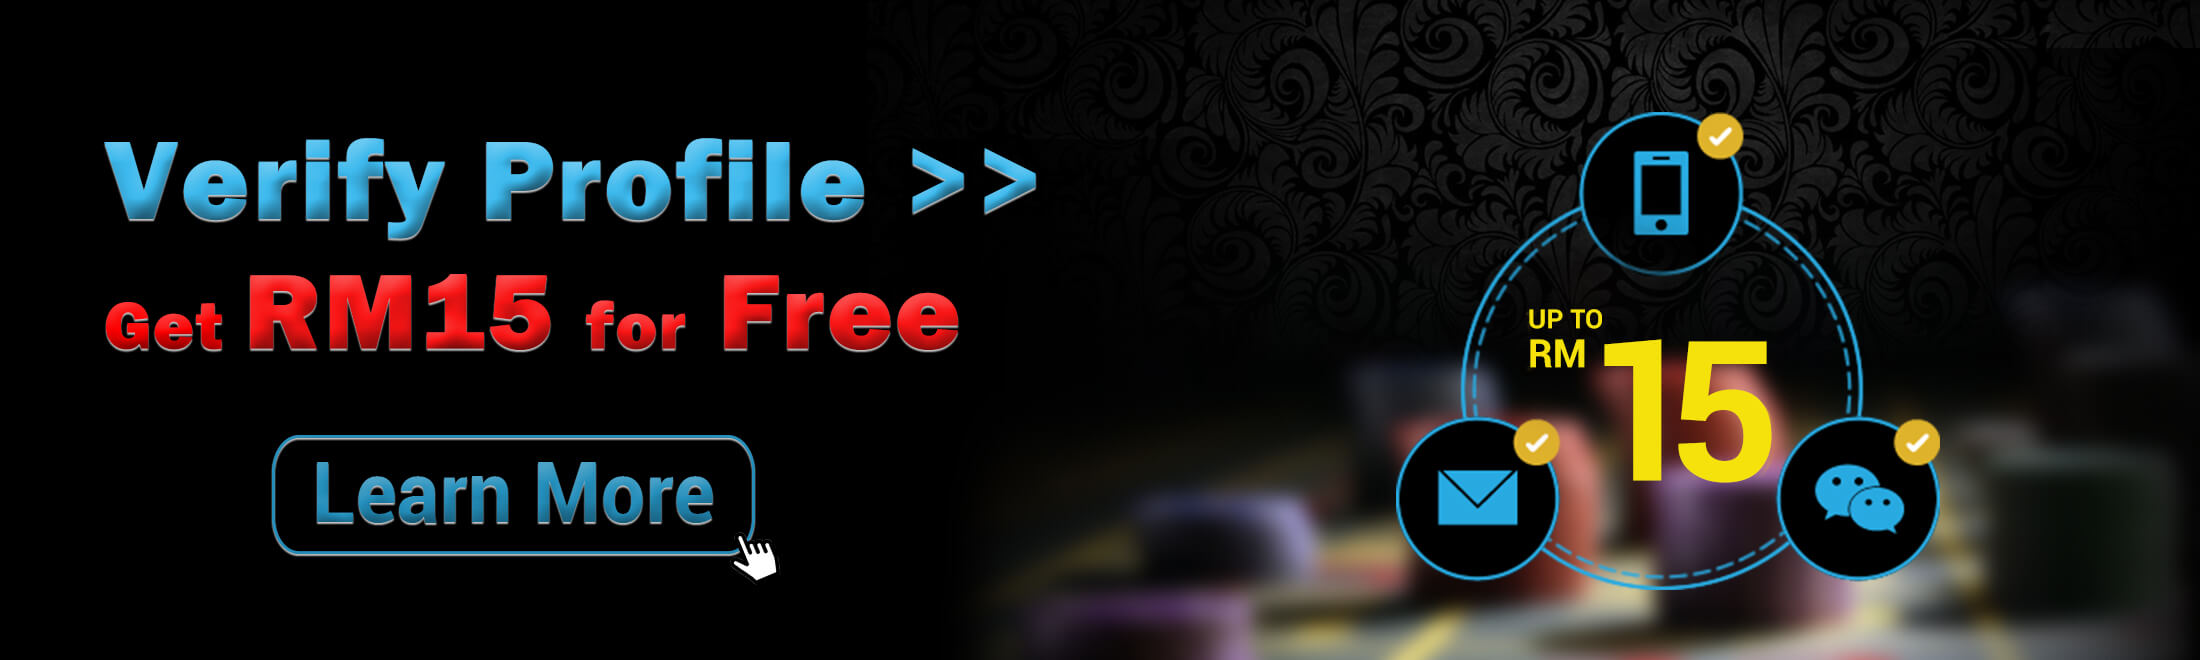 4D Online Casino Verify and Get RM 15 For Free